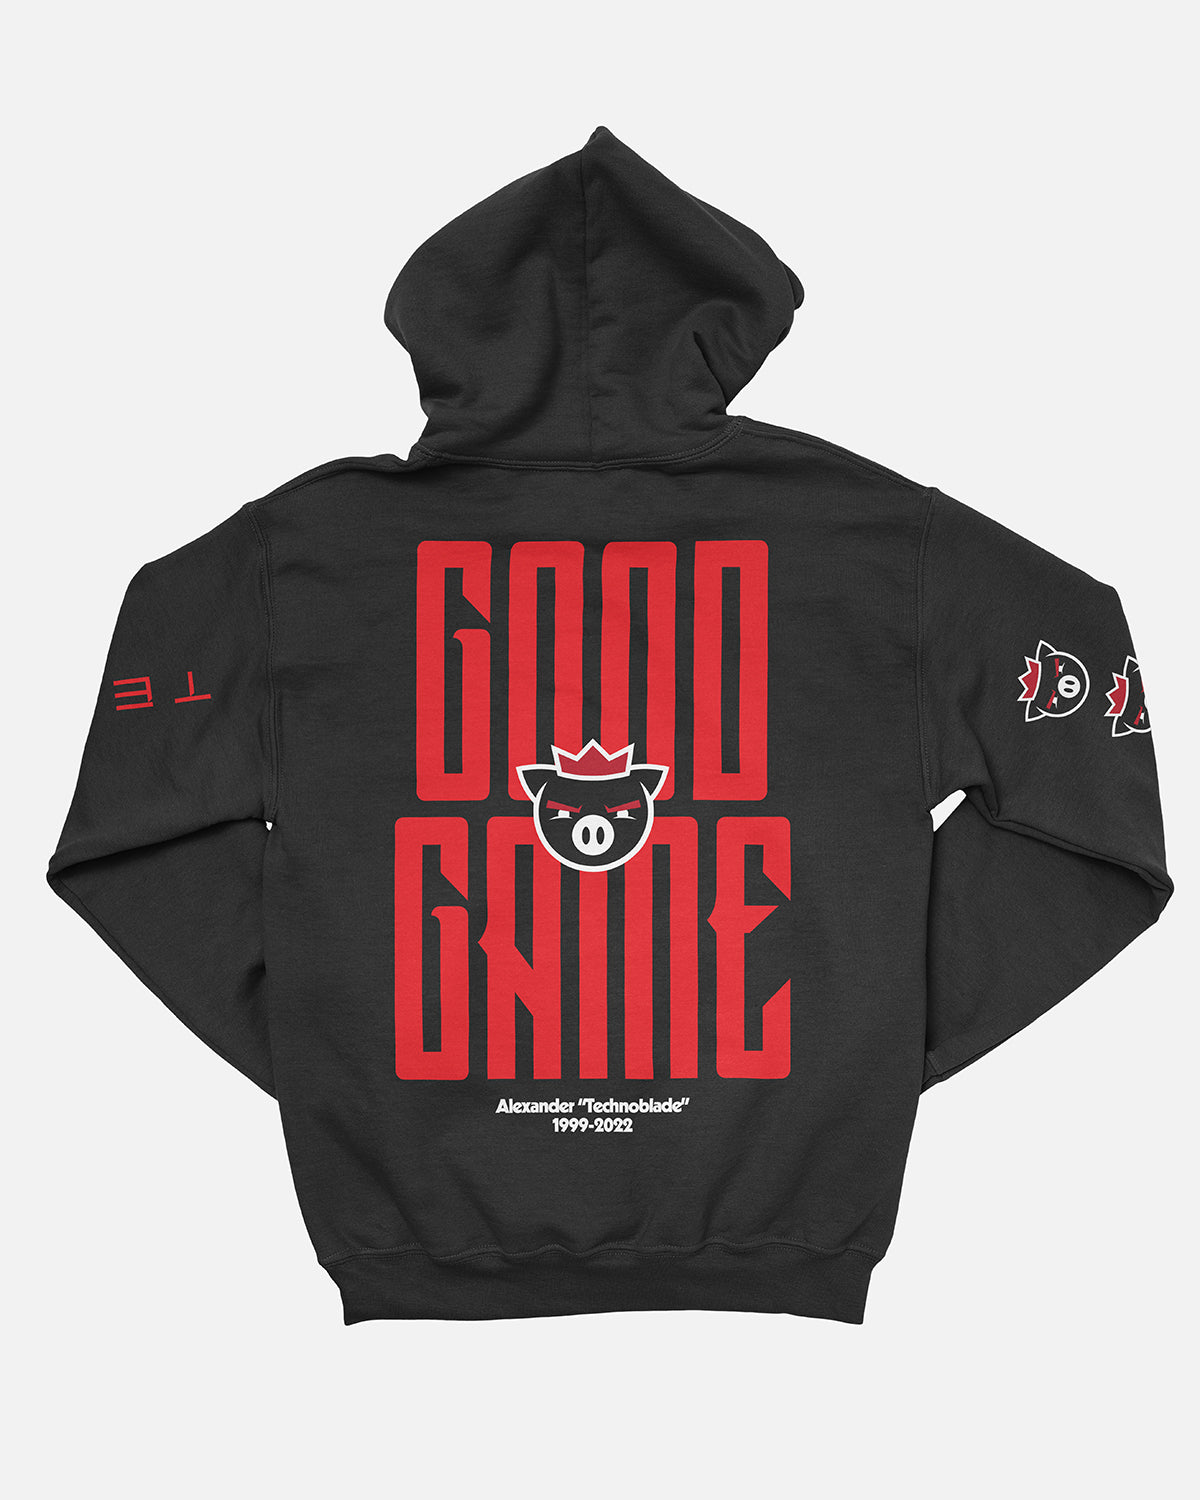 Technoblade 'Good Game' Hoodie (Black) - Technoblade Official